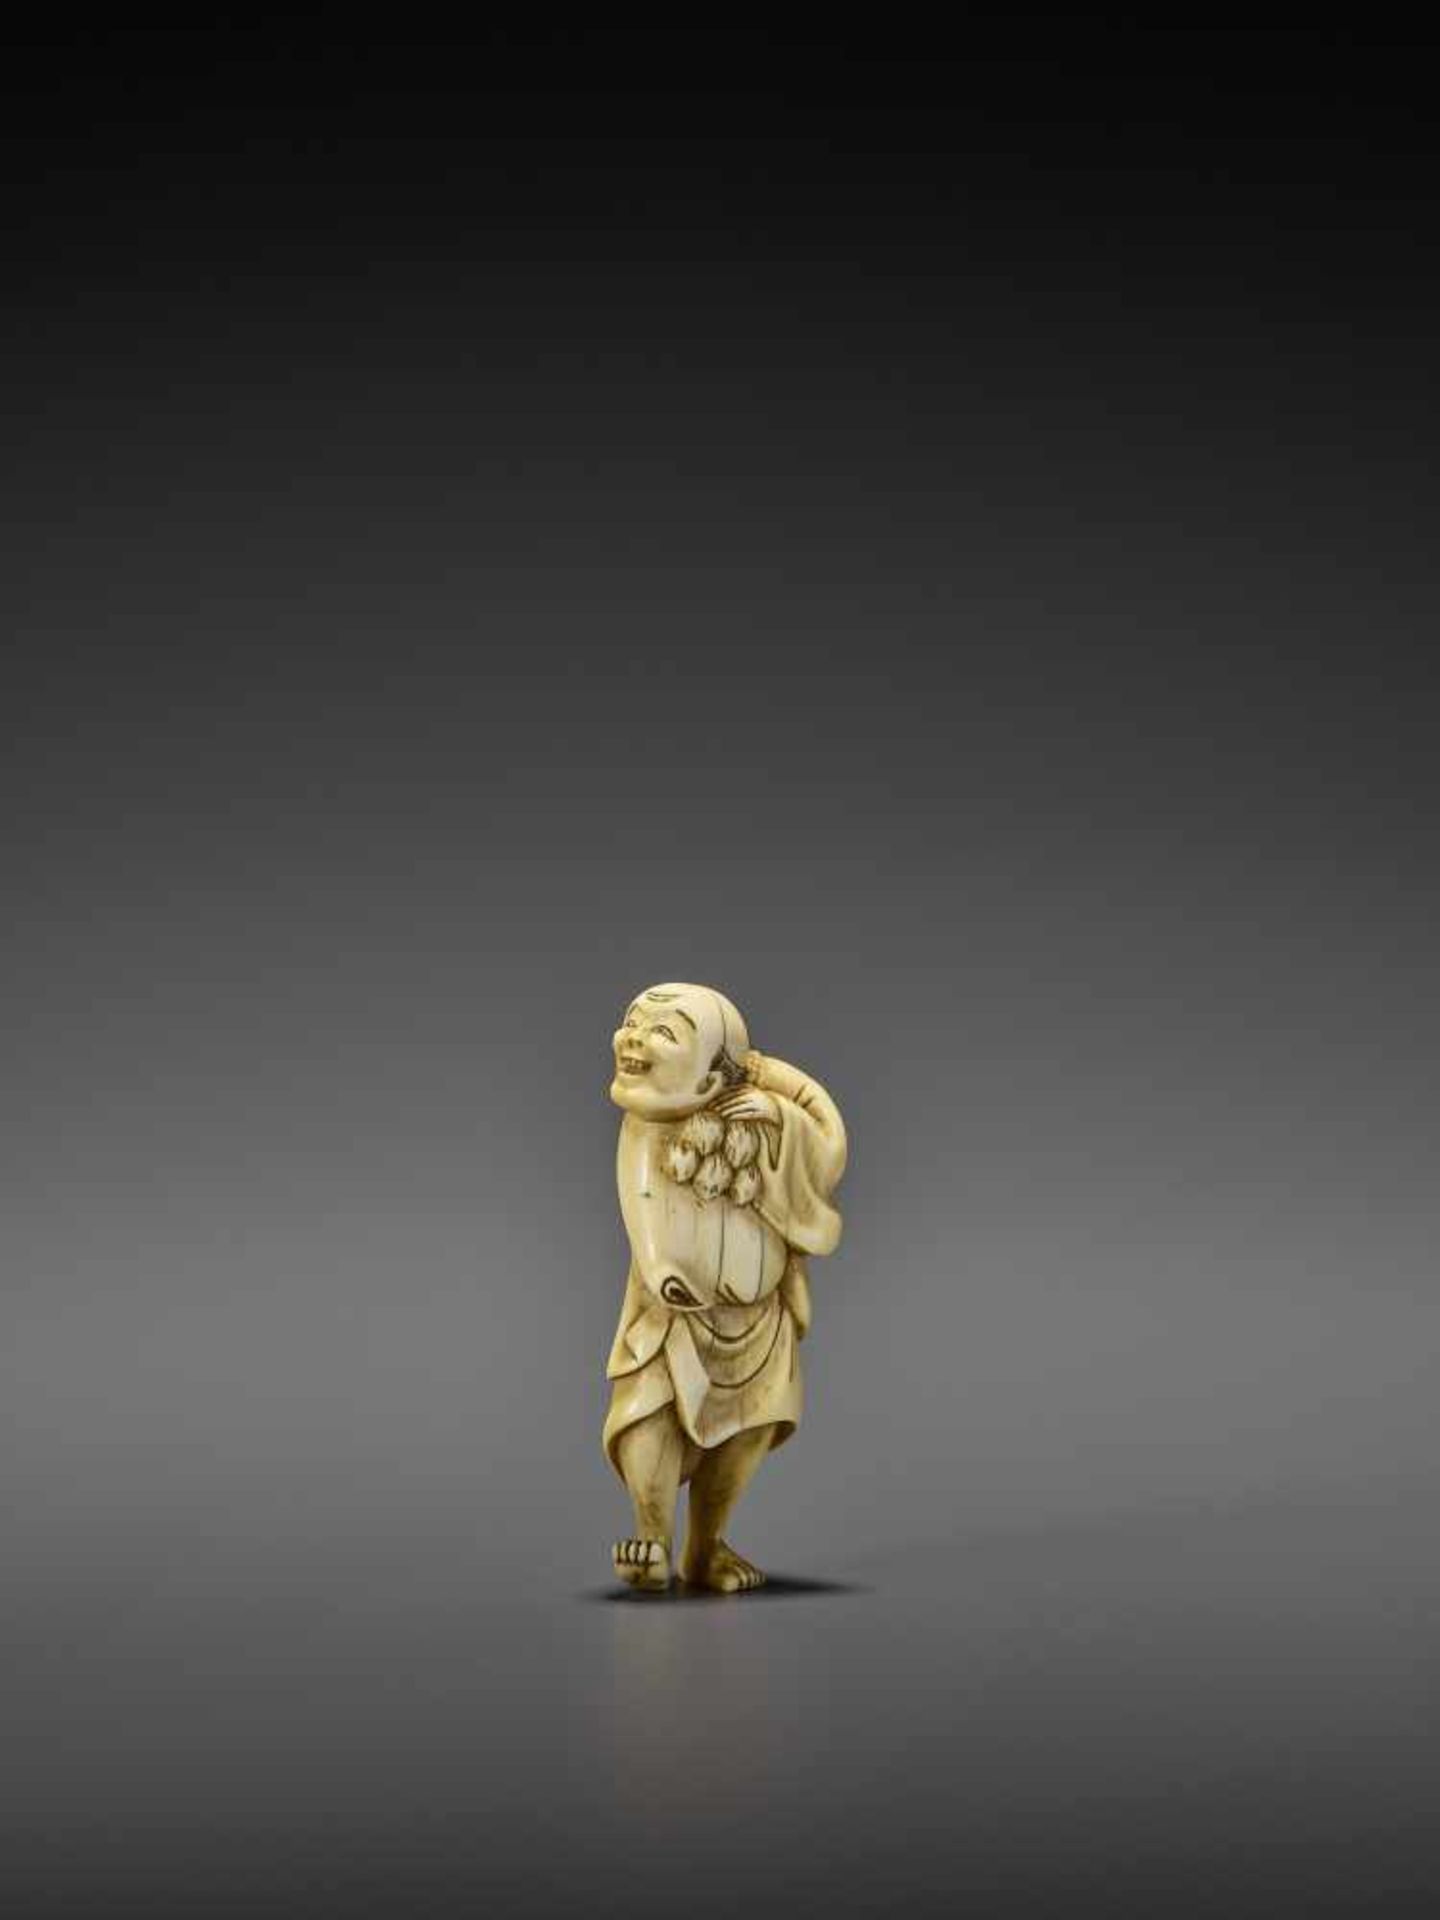 AN IVORY NETSUKE OF A PERSIMMON MERCHANT UnsignedJapan, early 19th century, Edo period (1615-1868) - Image 2 of 10